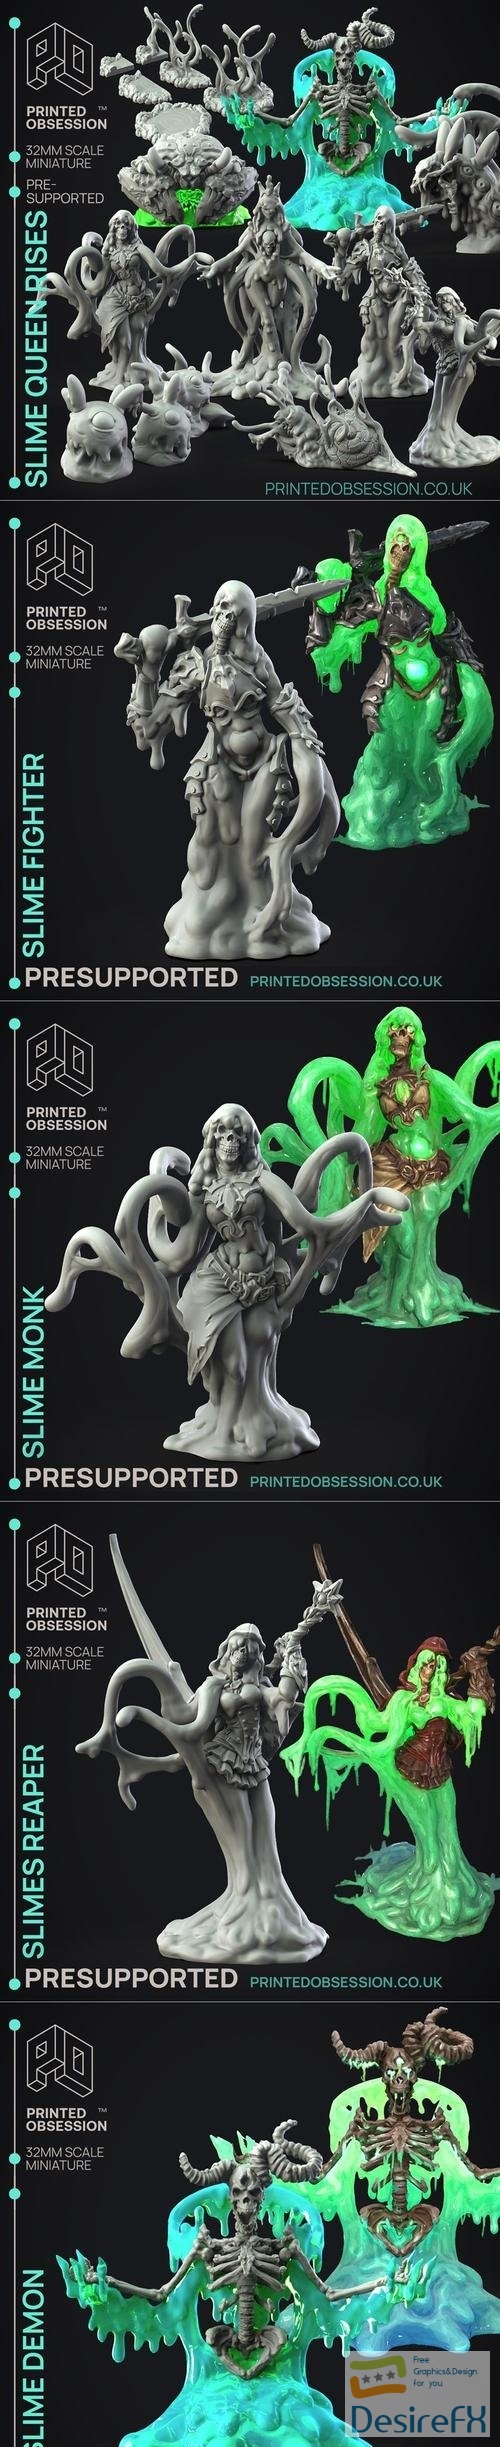 Printed Obsession - Side Quest Shop February 2023 – 3D Print